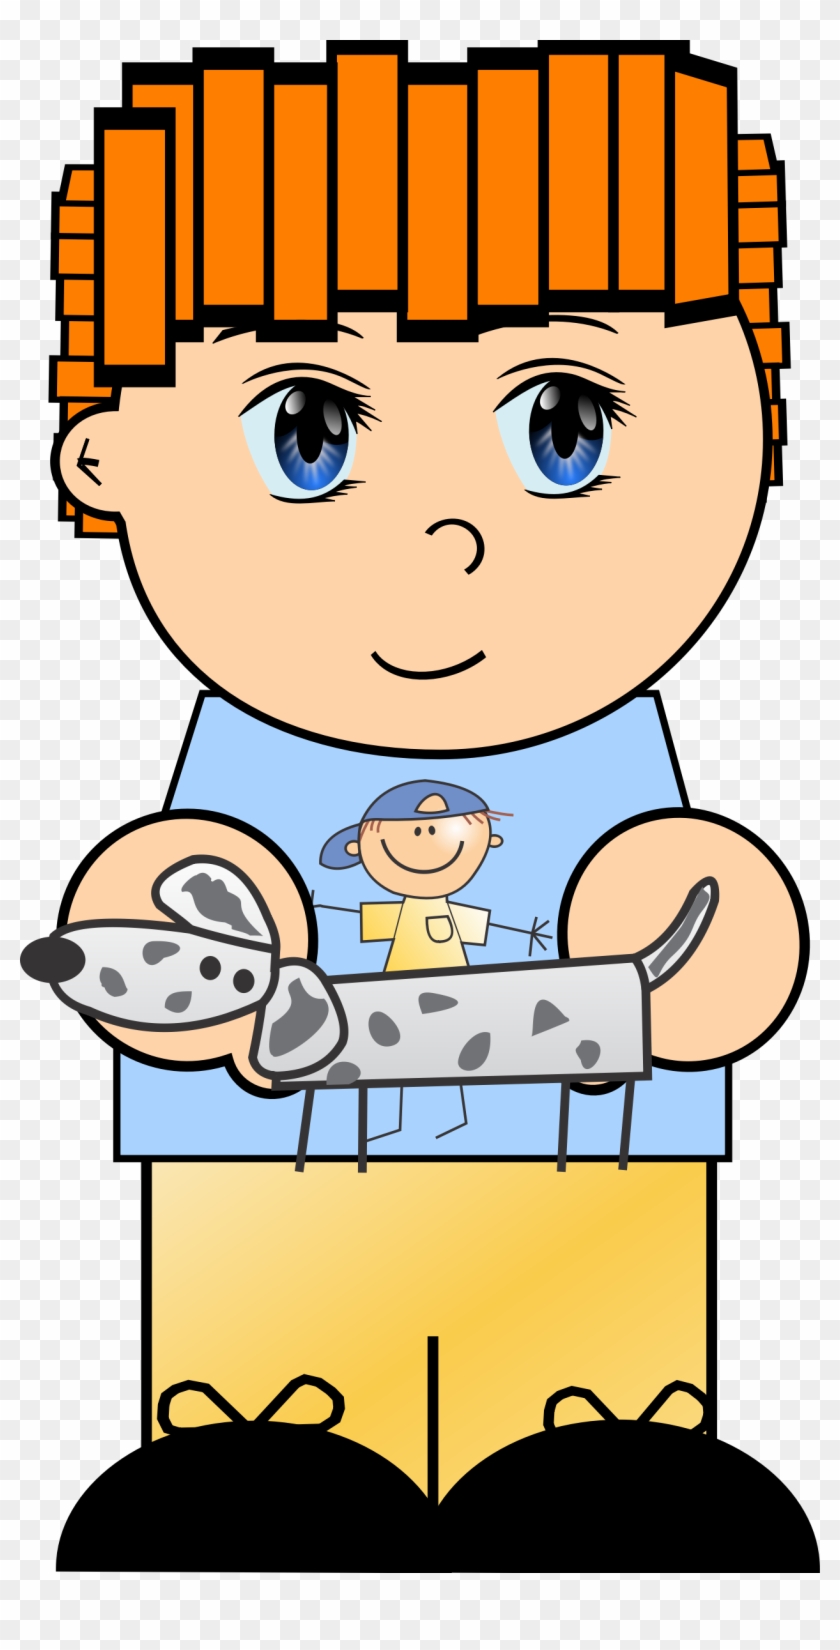 This Free Icons Png Design Of Cartoon Boy With Dog - Manga Eyes Clipart #5455949